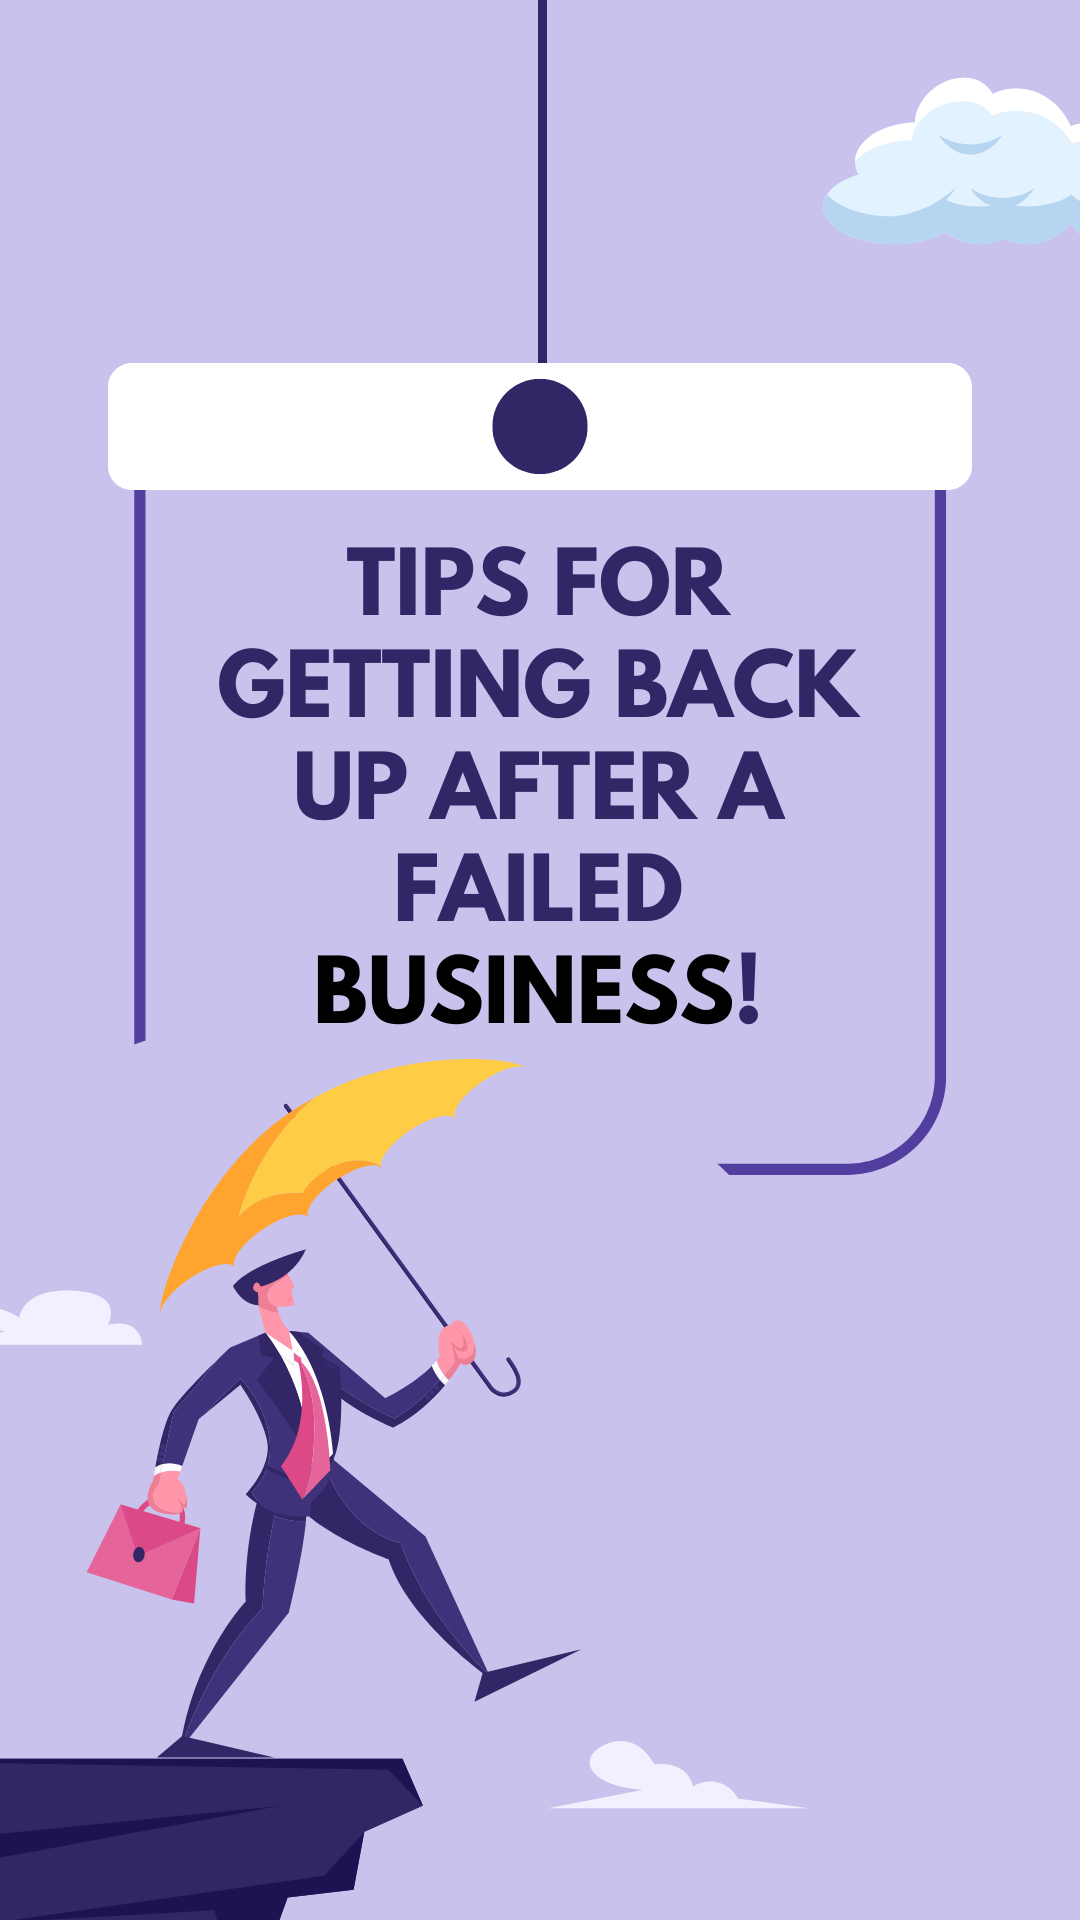 Tips for getting back up after a failed business! 